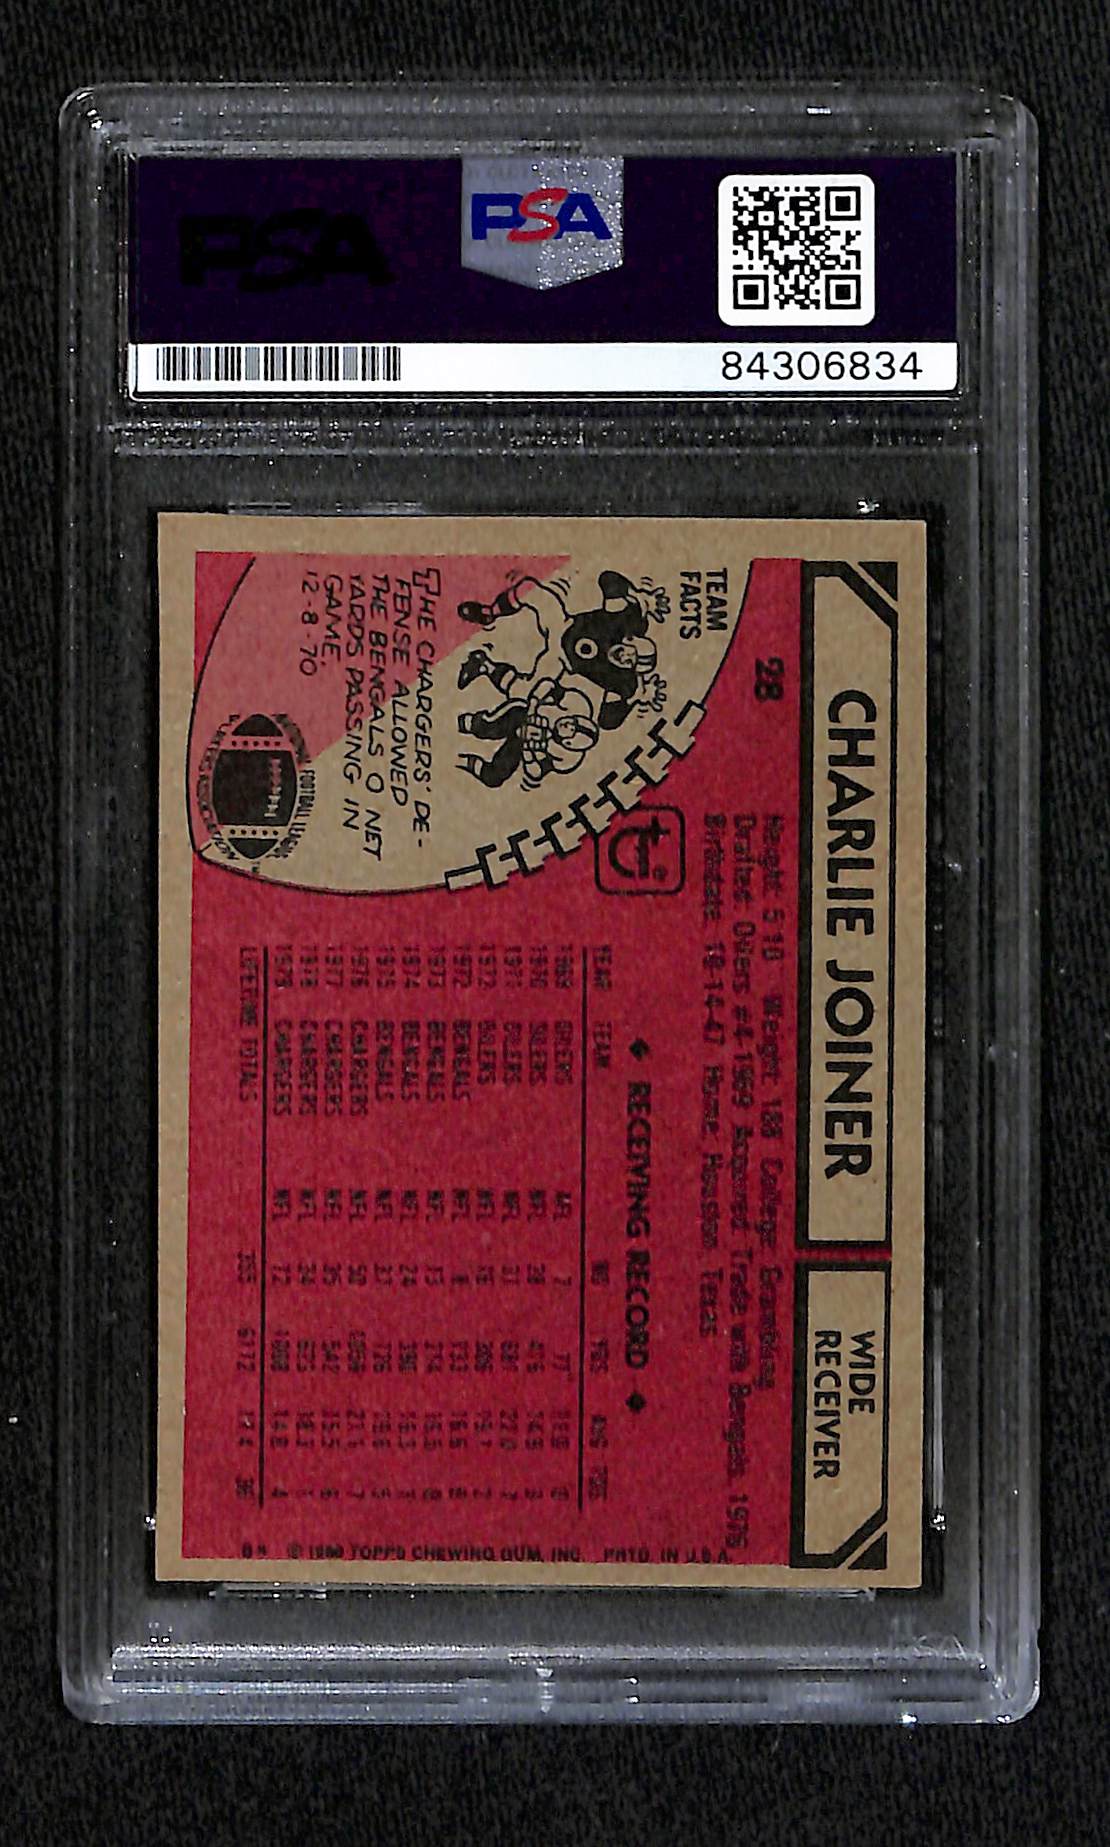 1980 TOPPS CHARLIE JOINER AUTO CARD WITH HOF 91 INSCRIPTION PSA DNA (6834)